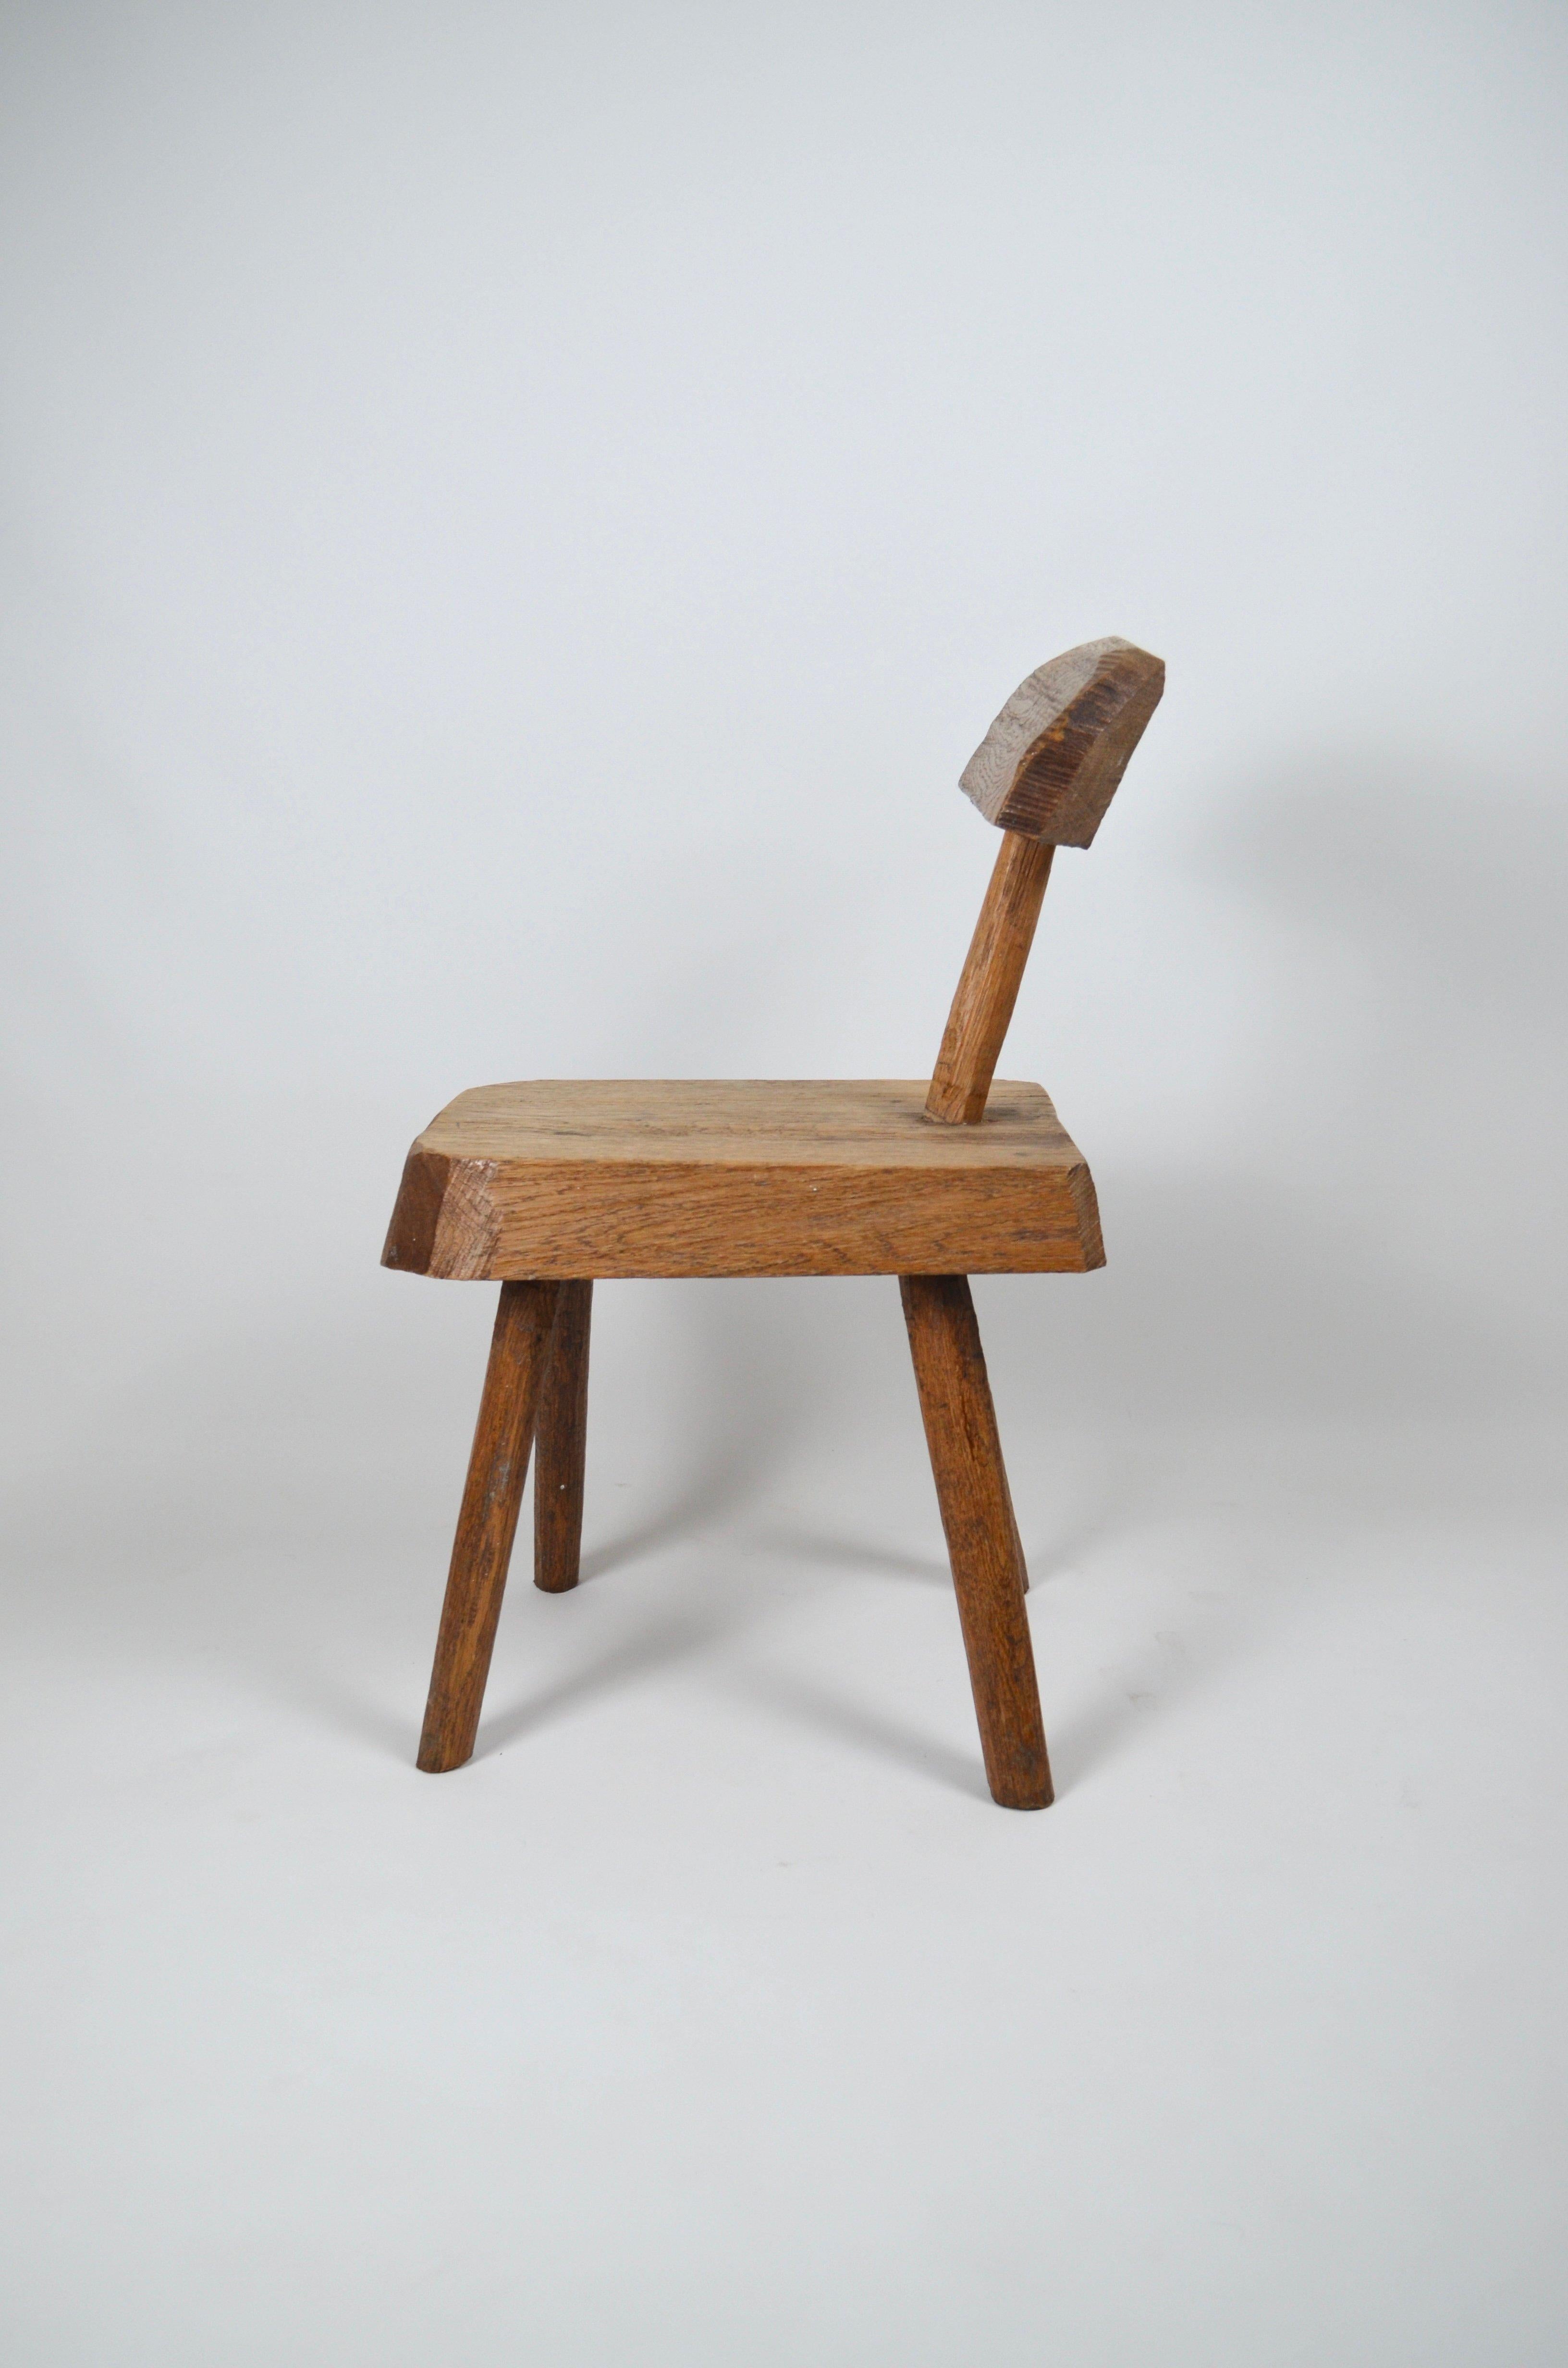 Late 20th Century Vintage french Brutalist Wooden Chair For Sale